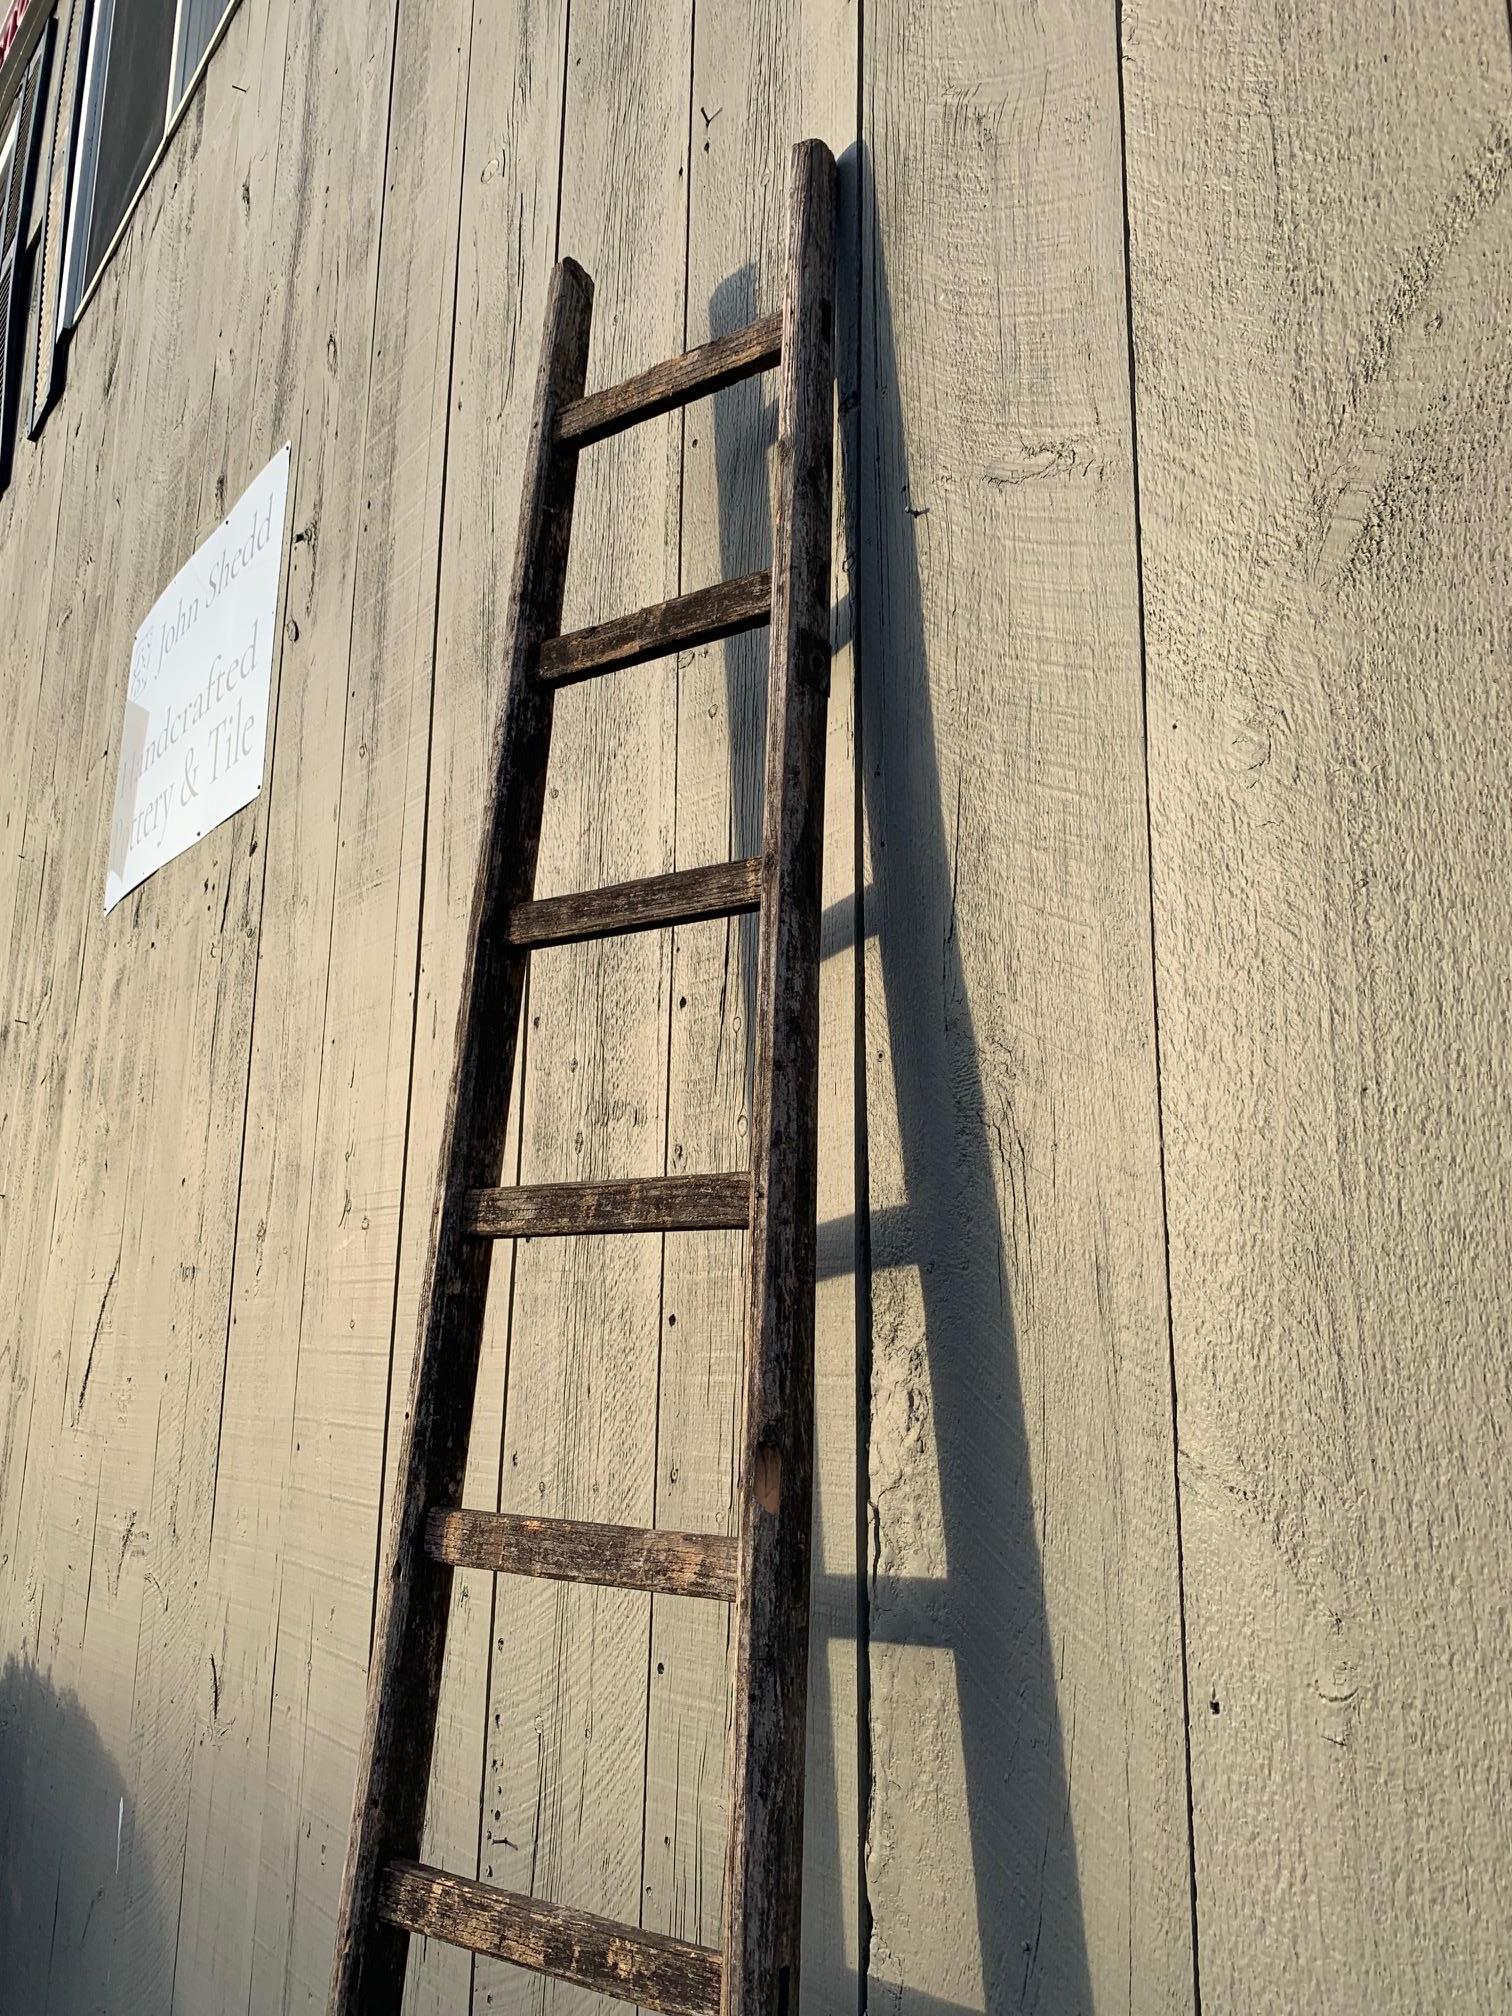 old wooden orchard ladders for sale